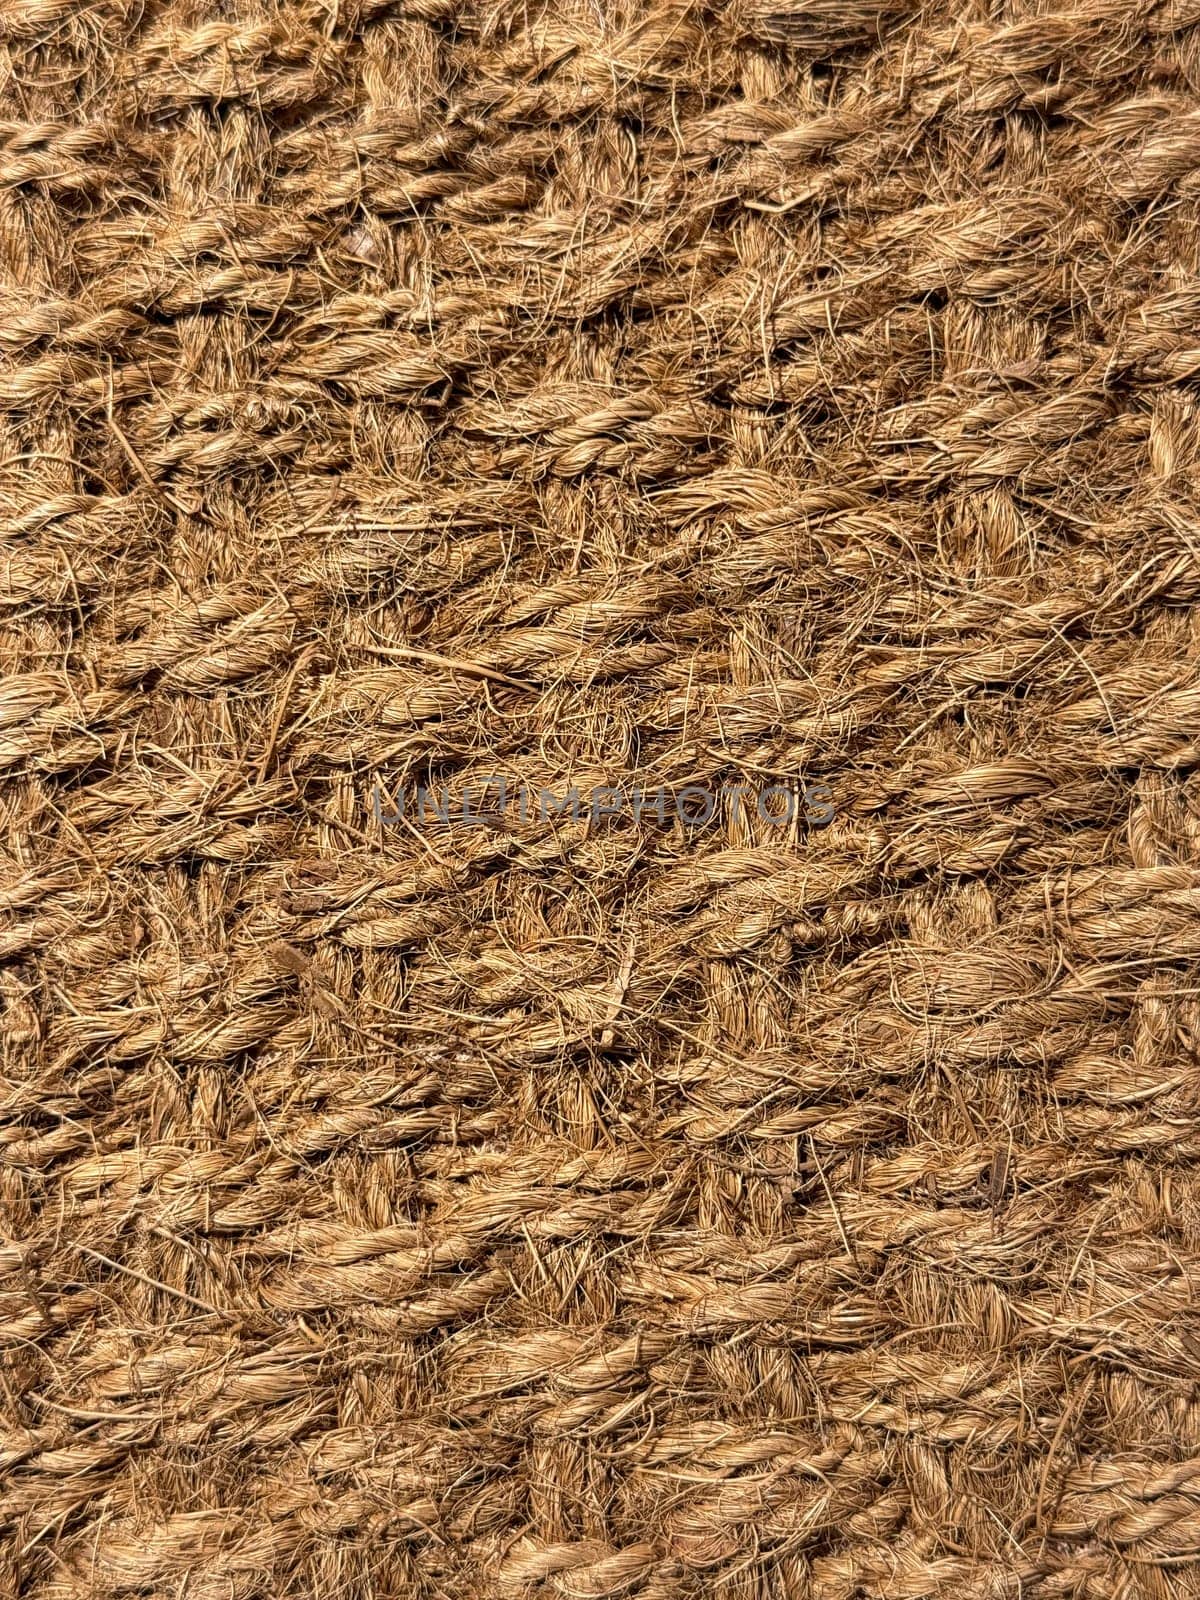 Close up of interwoven natural jute ropes creating textured pattern for rustic backgrounds and sustainable material concept. by Lunnica